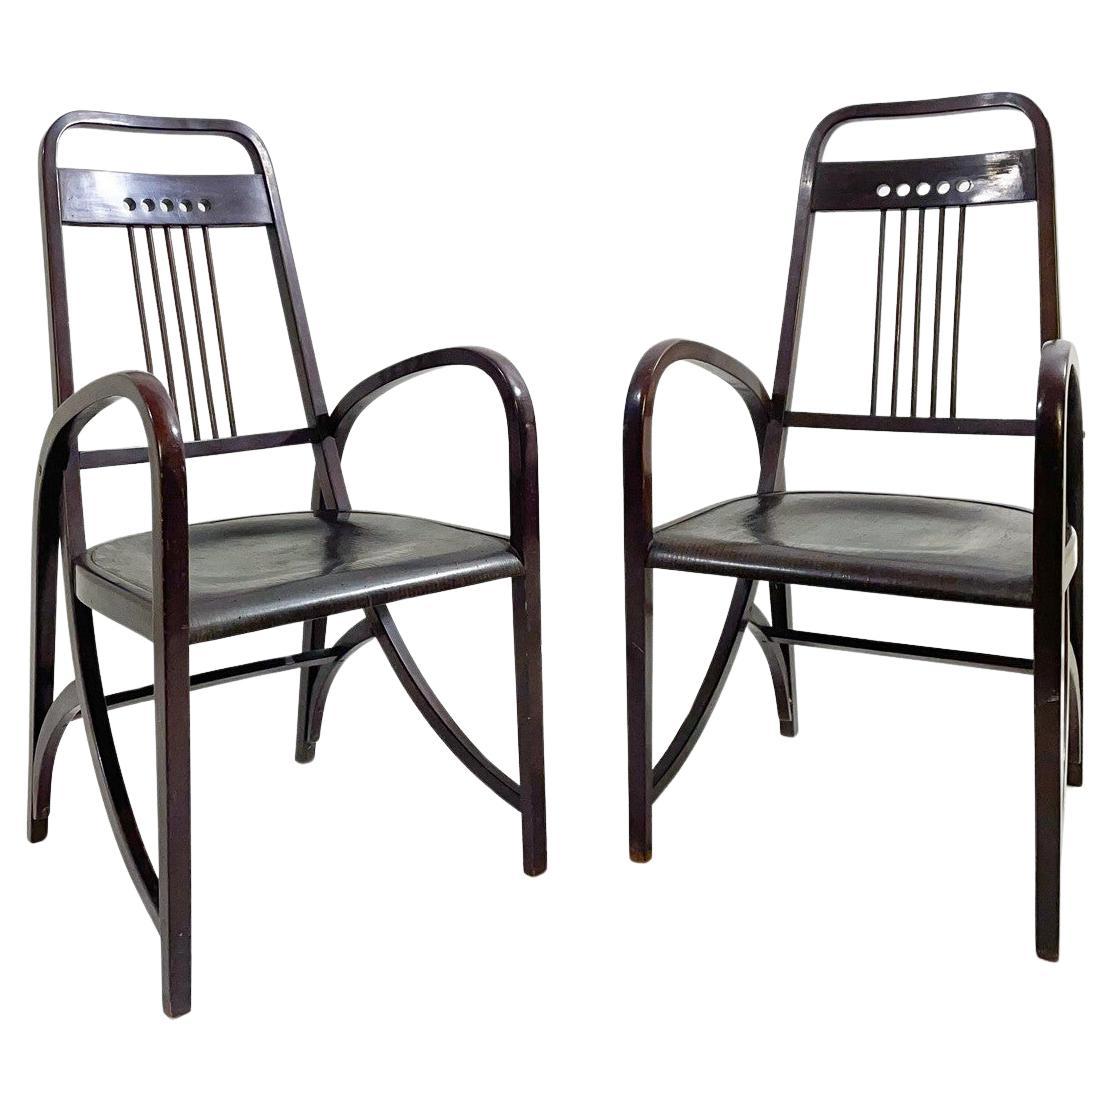 Pair of Armchairs Mod 1511 by Thonet, 1900s For Sale